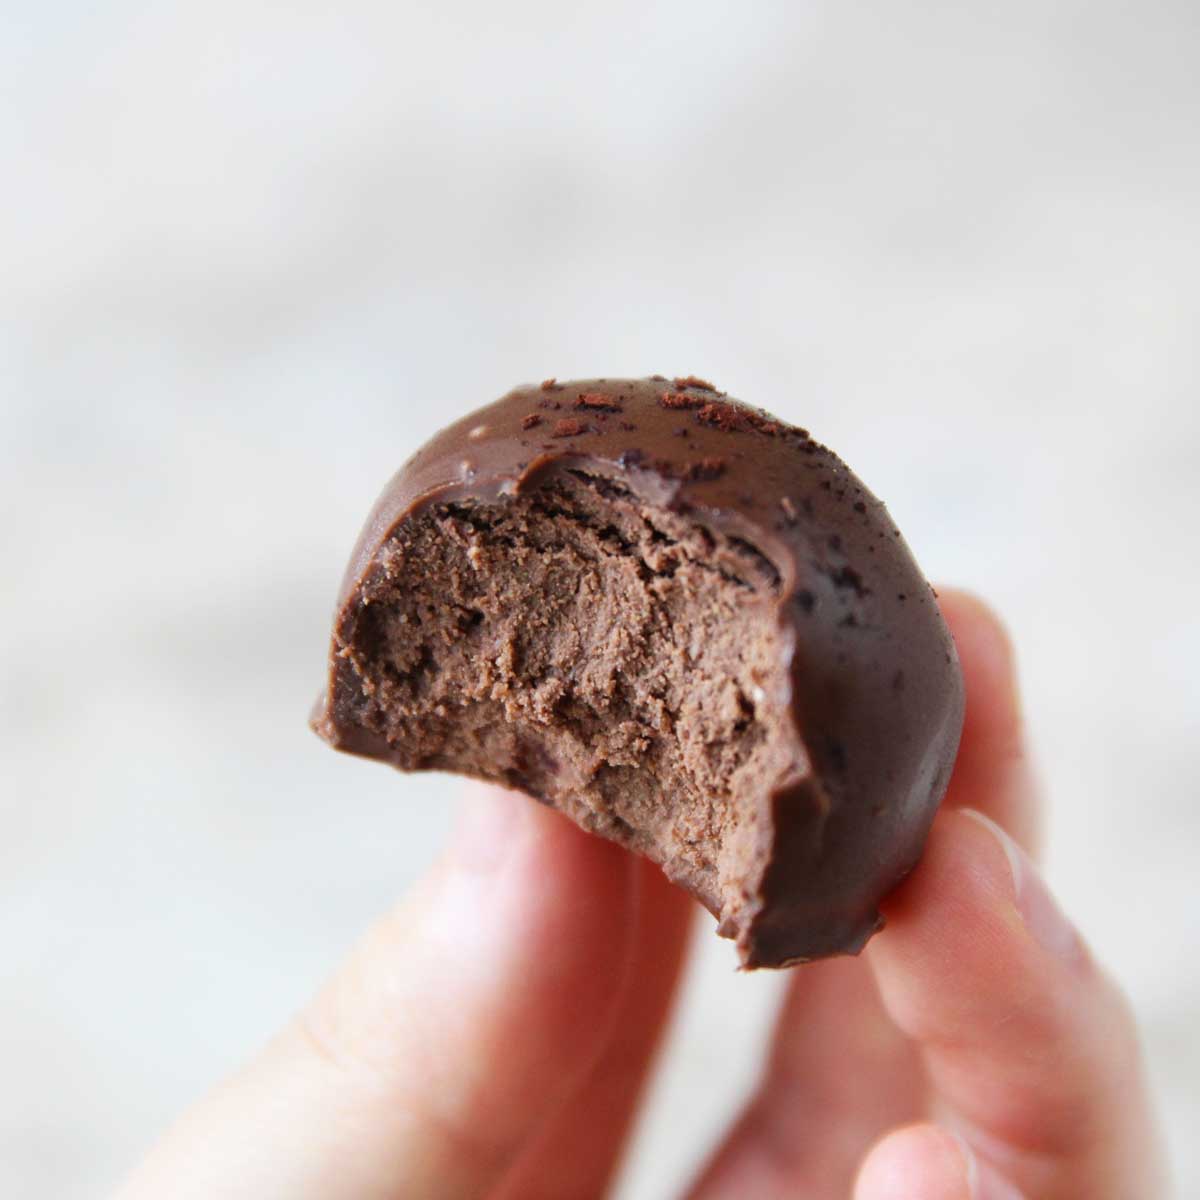 10 Easy & Healthy Protein Ball Recipes Made with Fruit, Veggies, Nuts and Seeds - protein balls